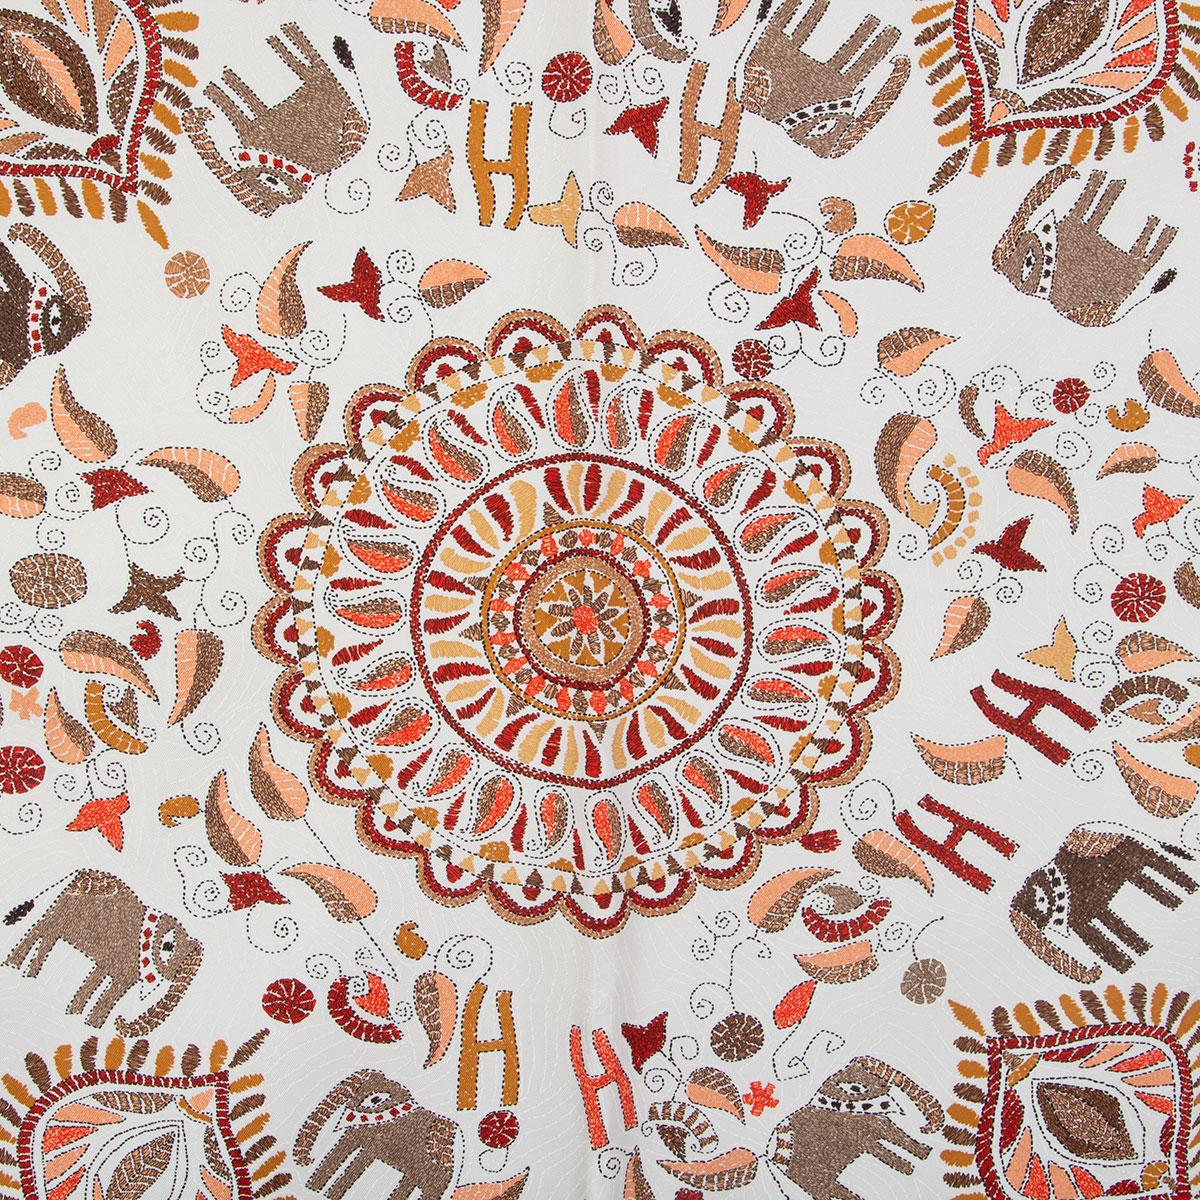 100% authentic Hermes 'Kantha 90' scarf in white silk twill (100%) with contrasting bright red hem and details in taupe, beige, salmon, ochre. Has been worn and is in excellent condition.

Designed in 2008. Inspired by traditional Indian patterns. A